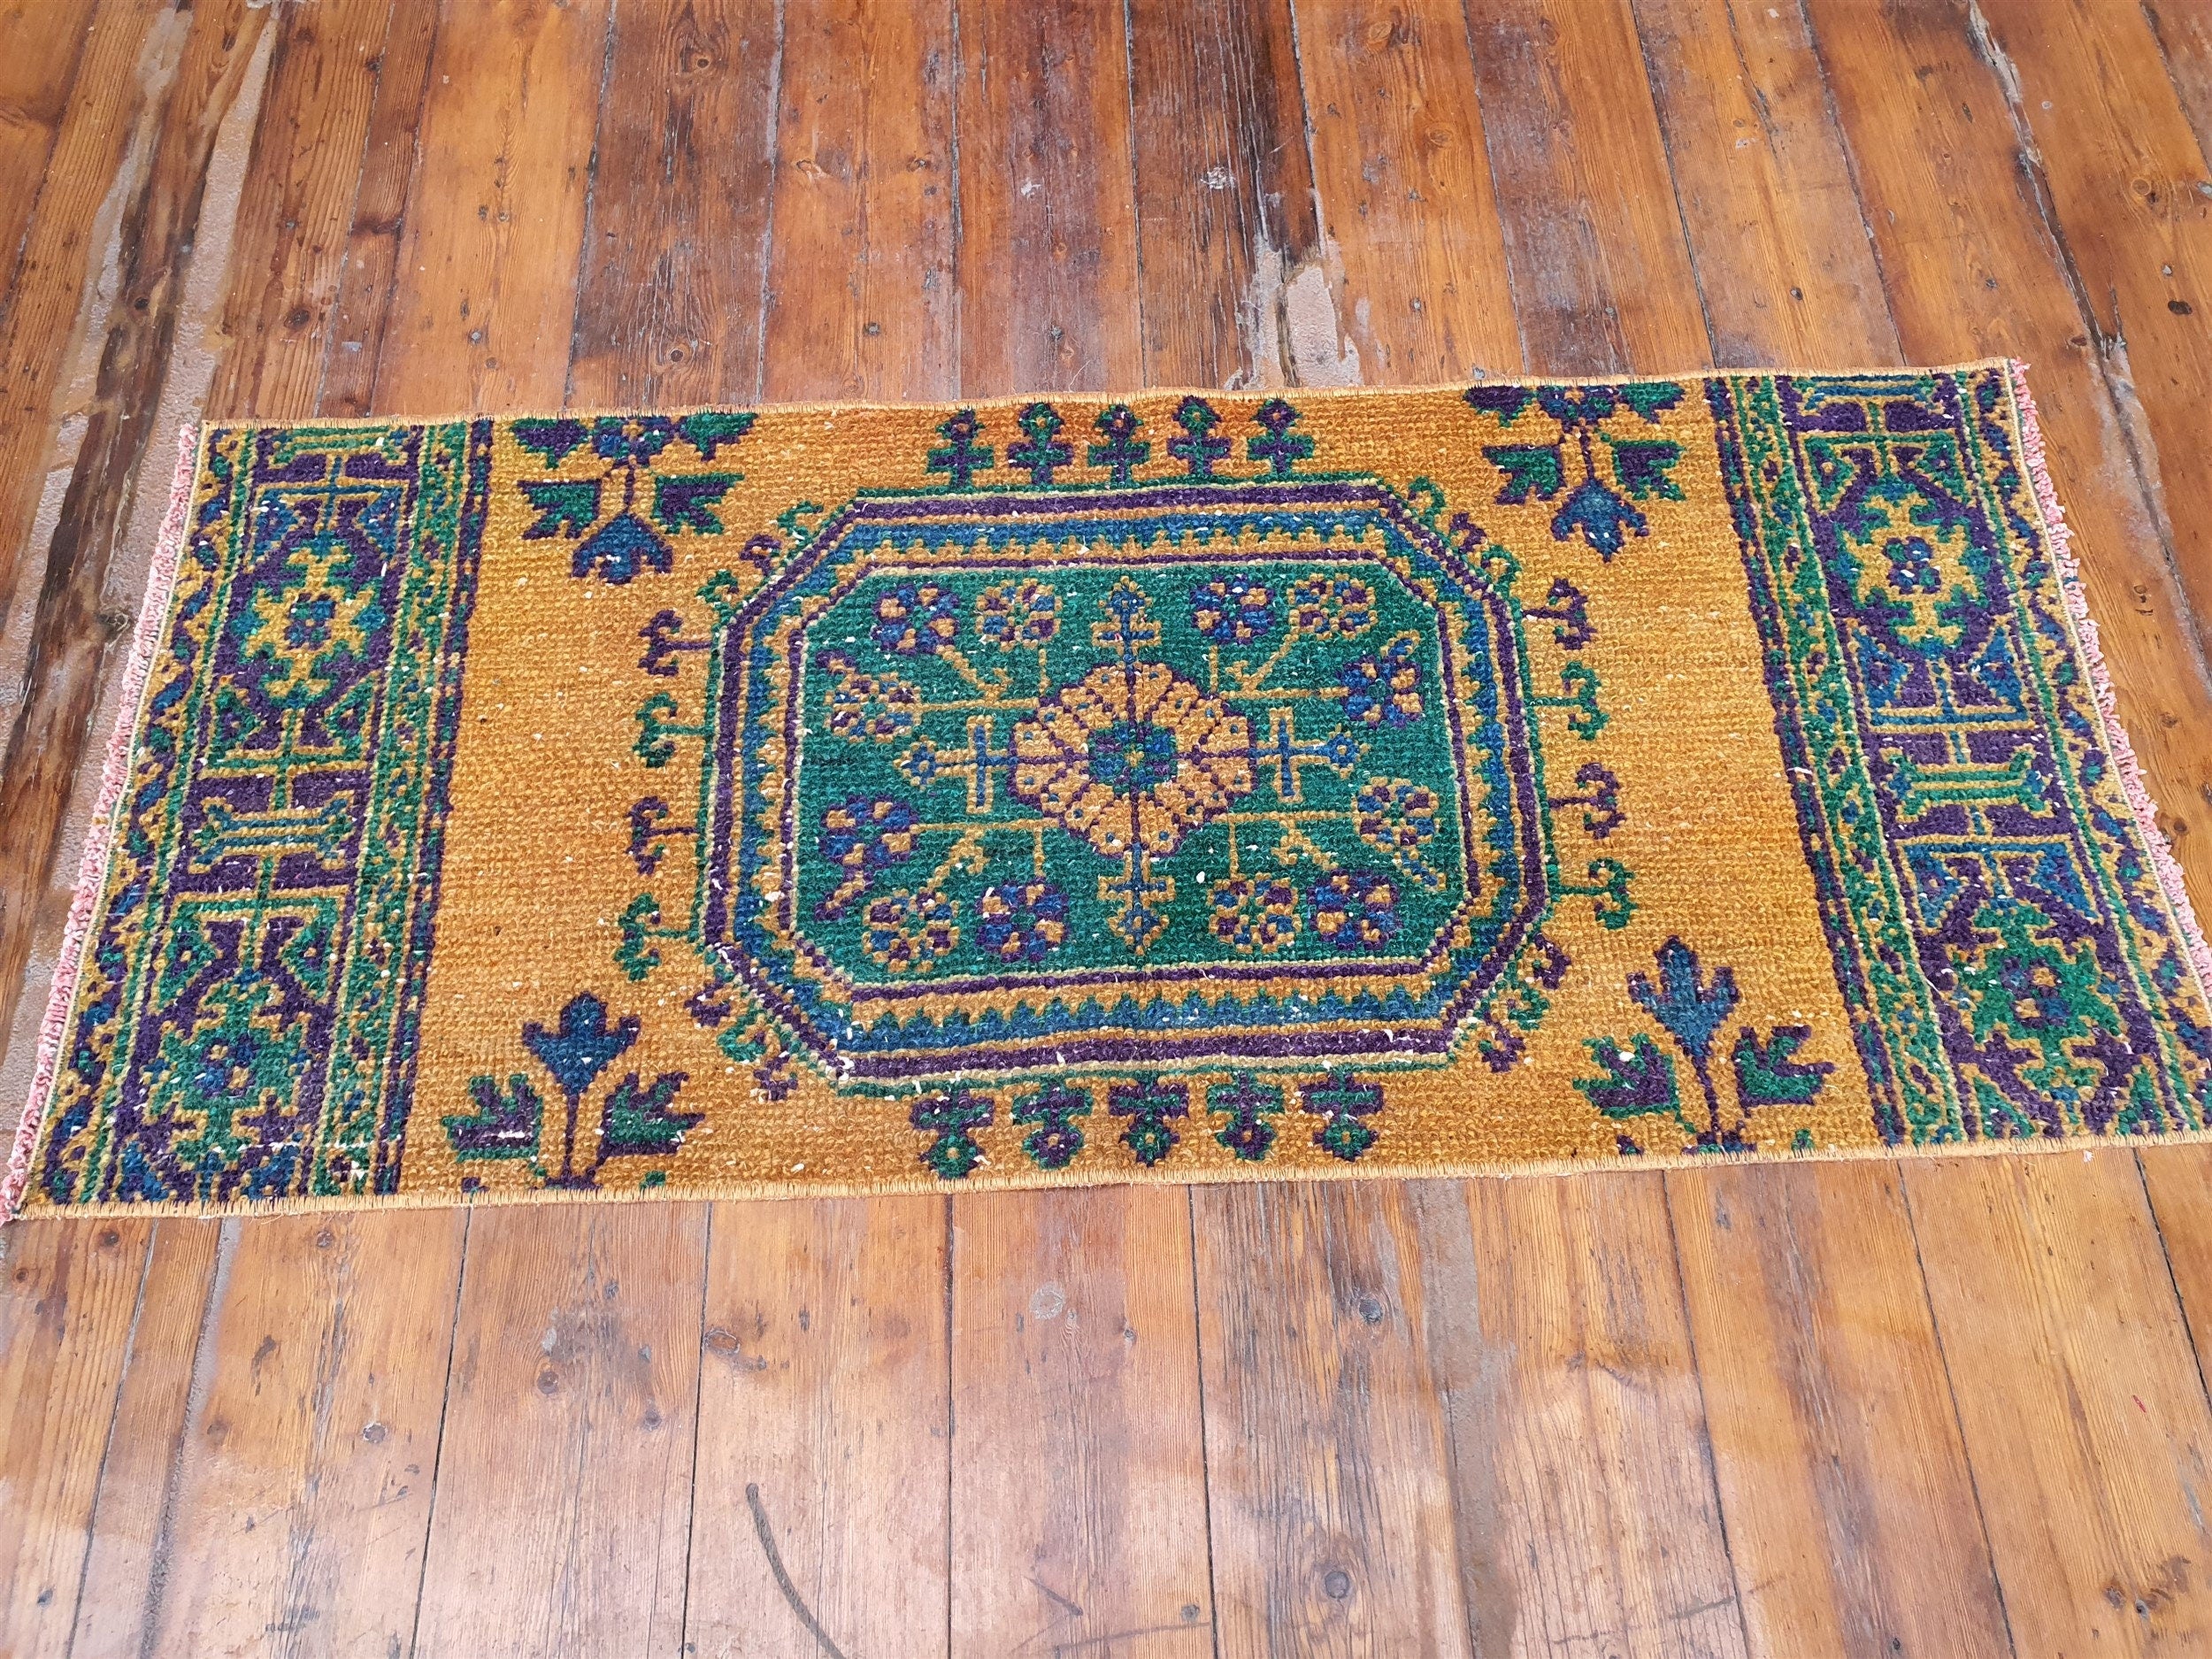 Small Turkish Rug, 4 ft 3 in x 1 ft 9 in, Apricot Orange and Teal Green Vintage Faded Distressed Door Mat